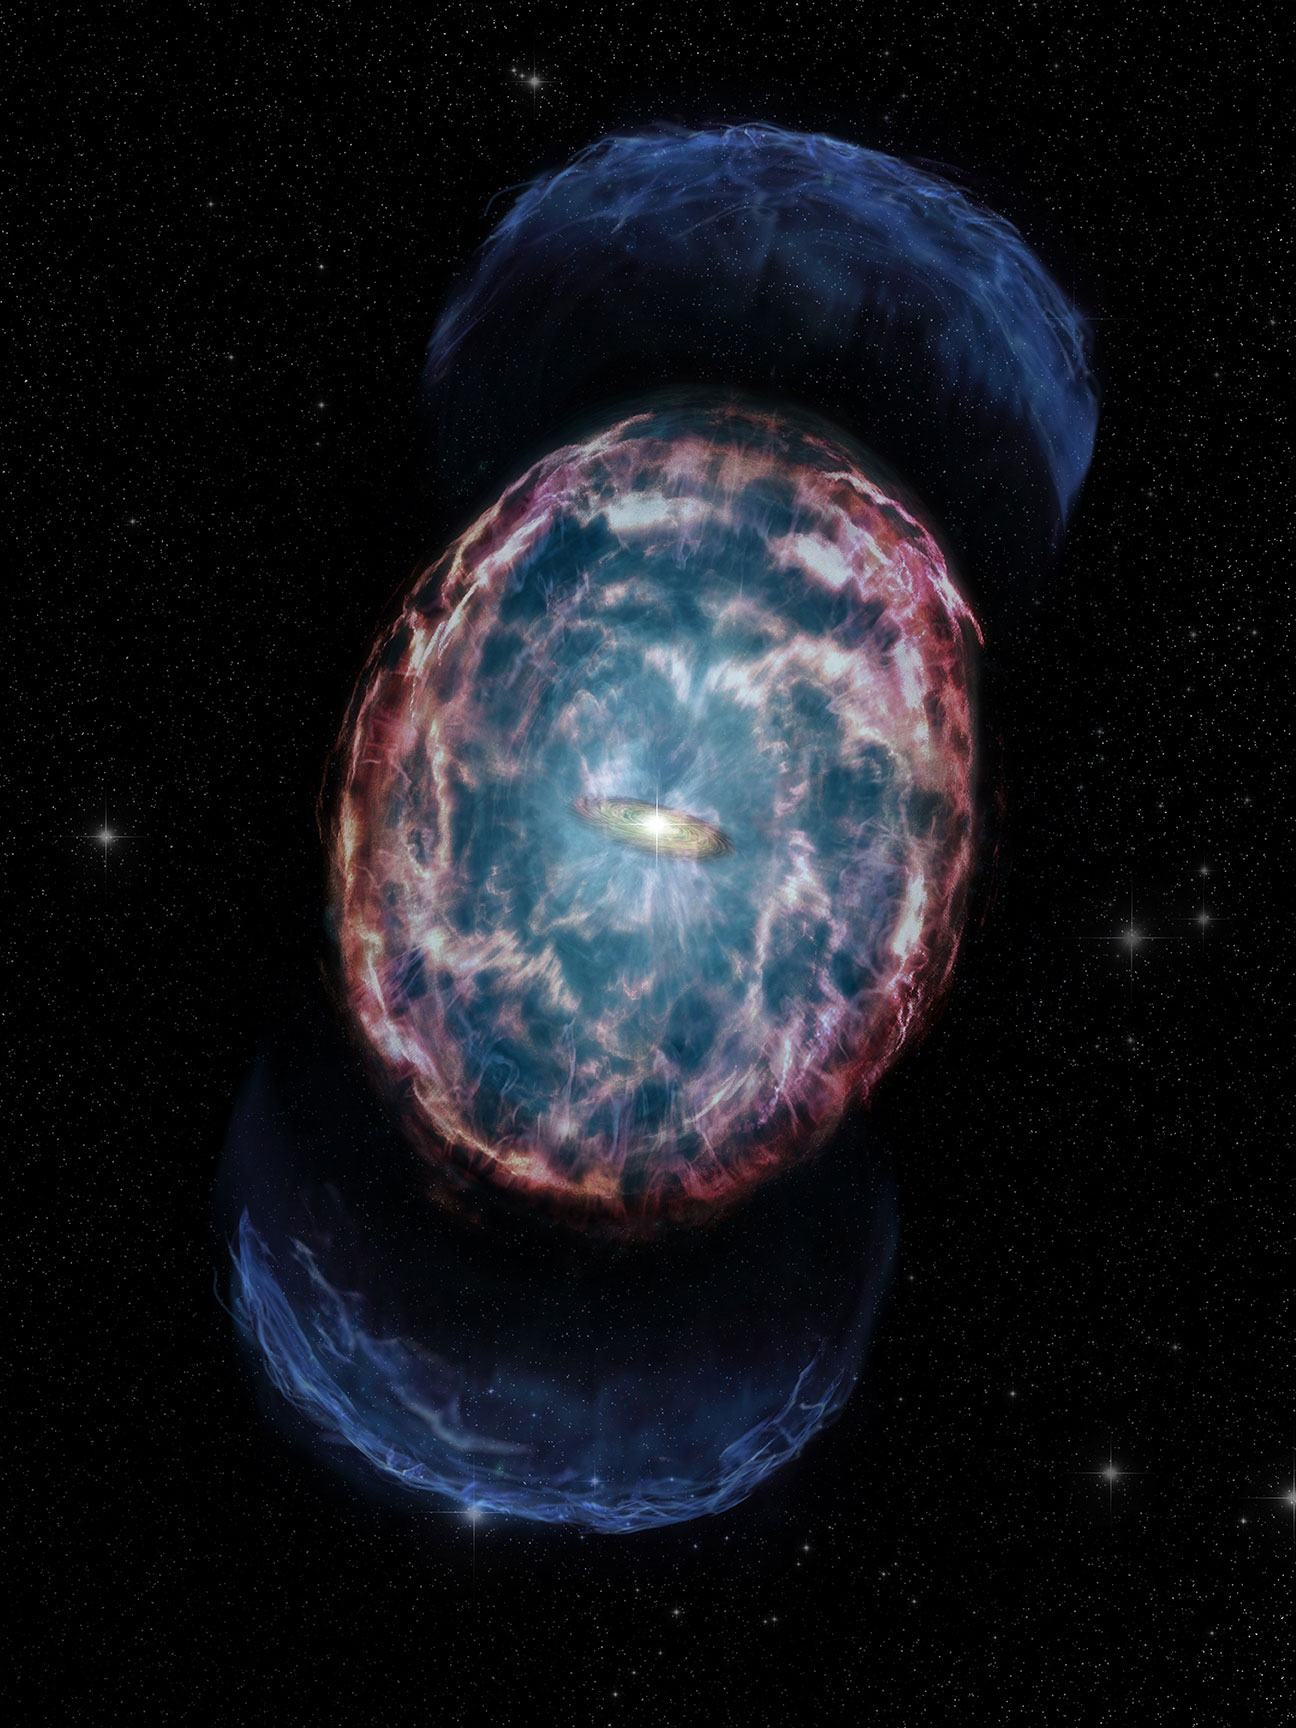 An artist's conception illustrates the aftermath of two neutron stars merging. Chandra has been collecting data on such an event called GW170817 since shortly after it was first detected in gravitational waves by the LIGO and Virgo on August 17, 2017.